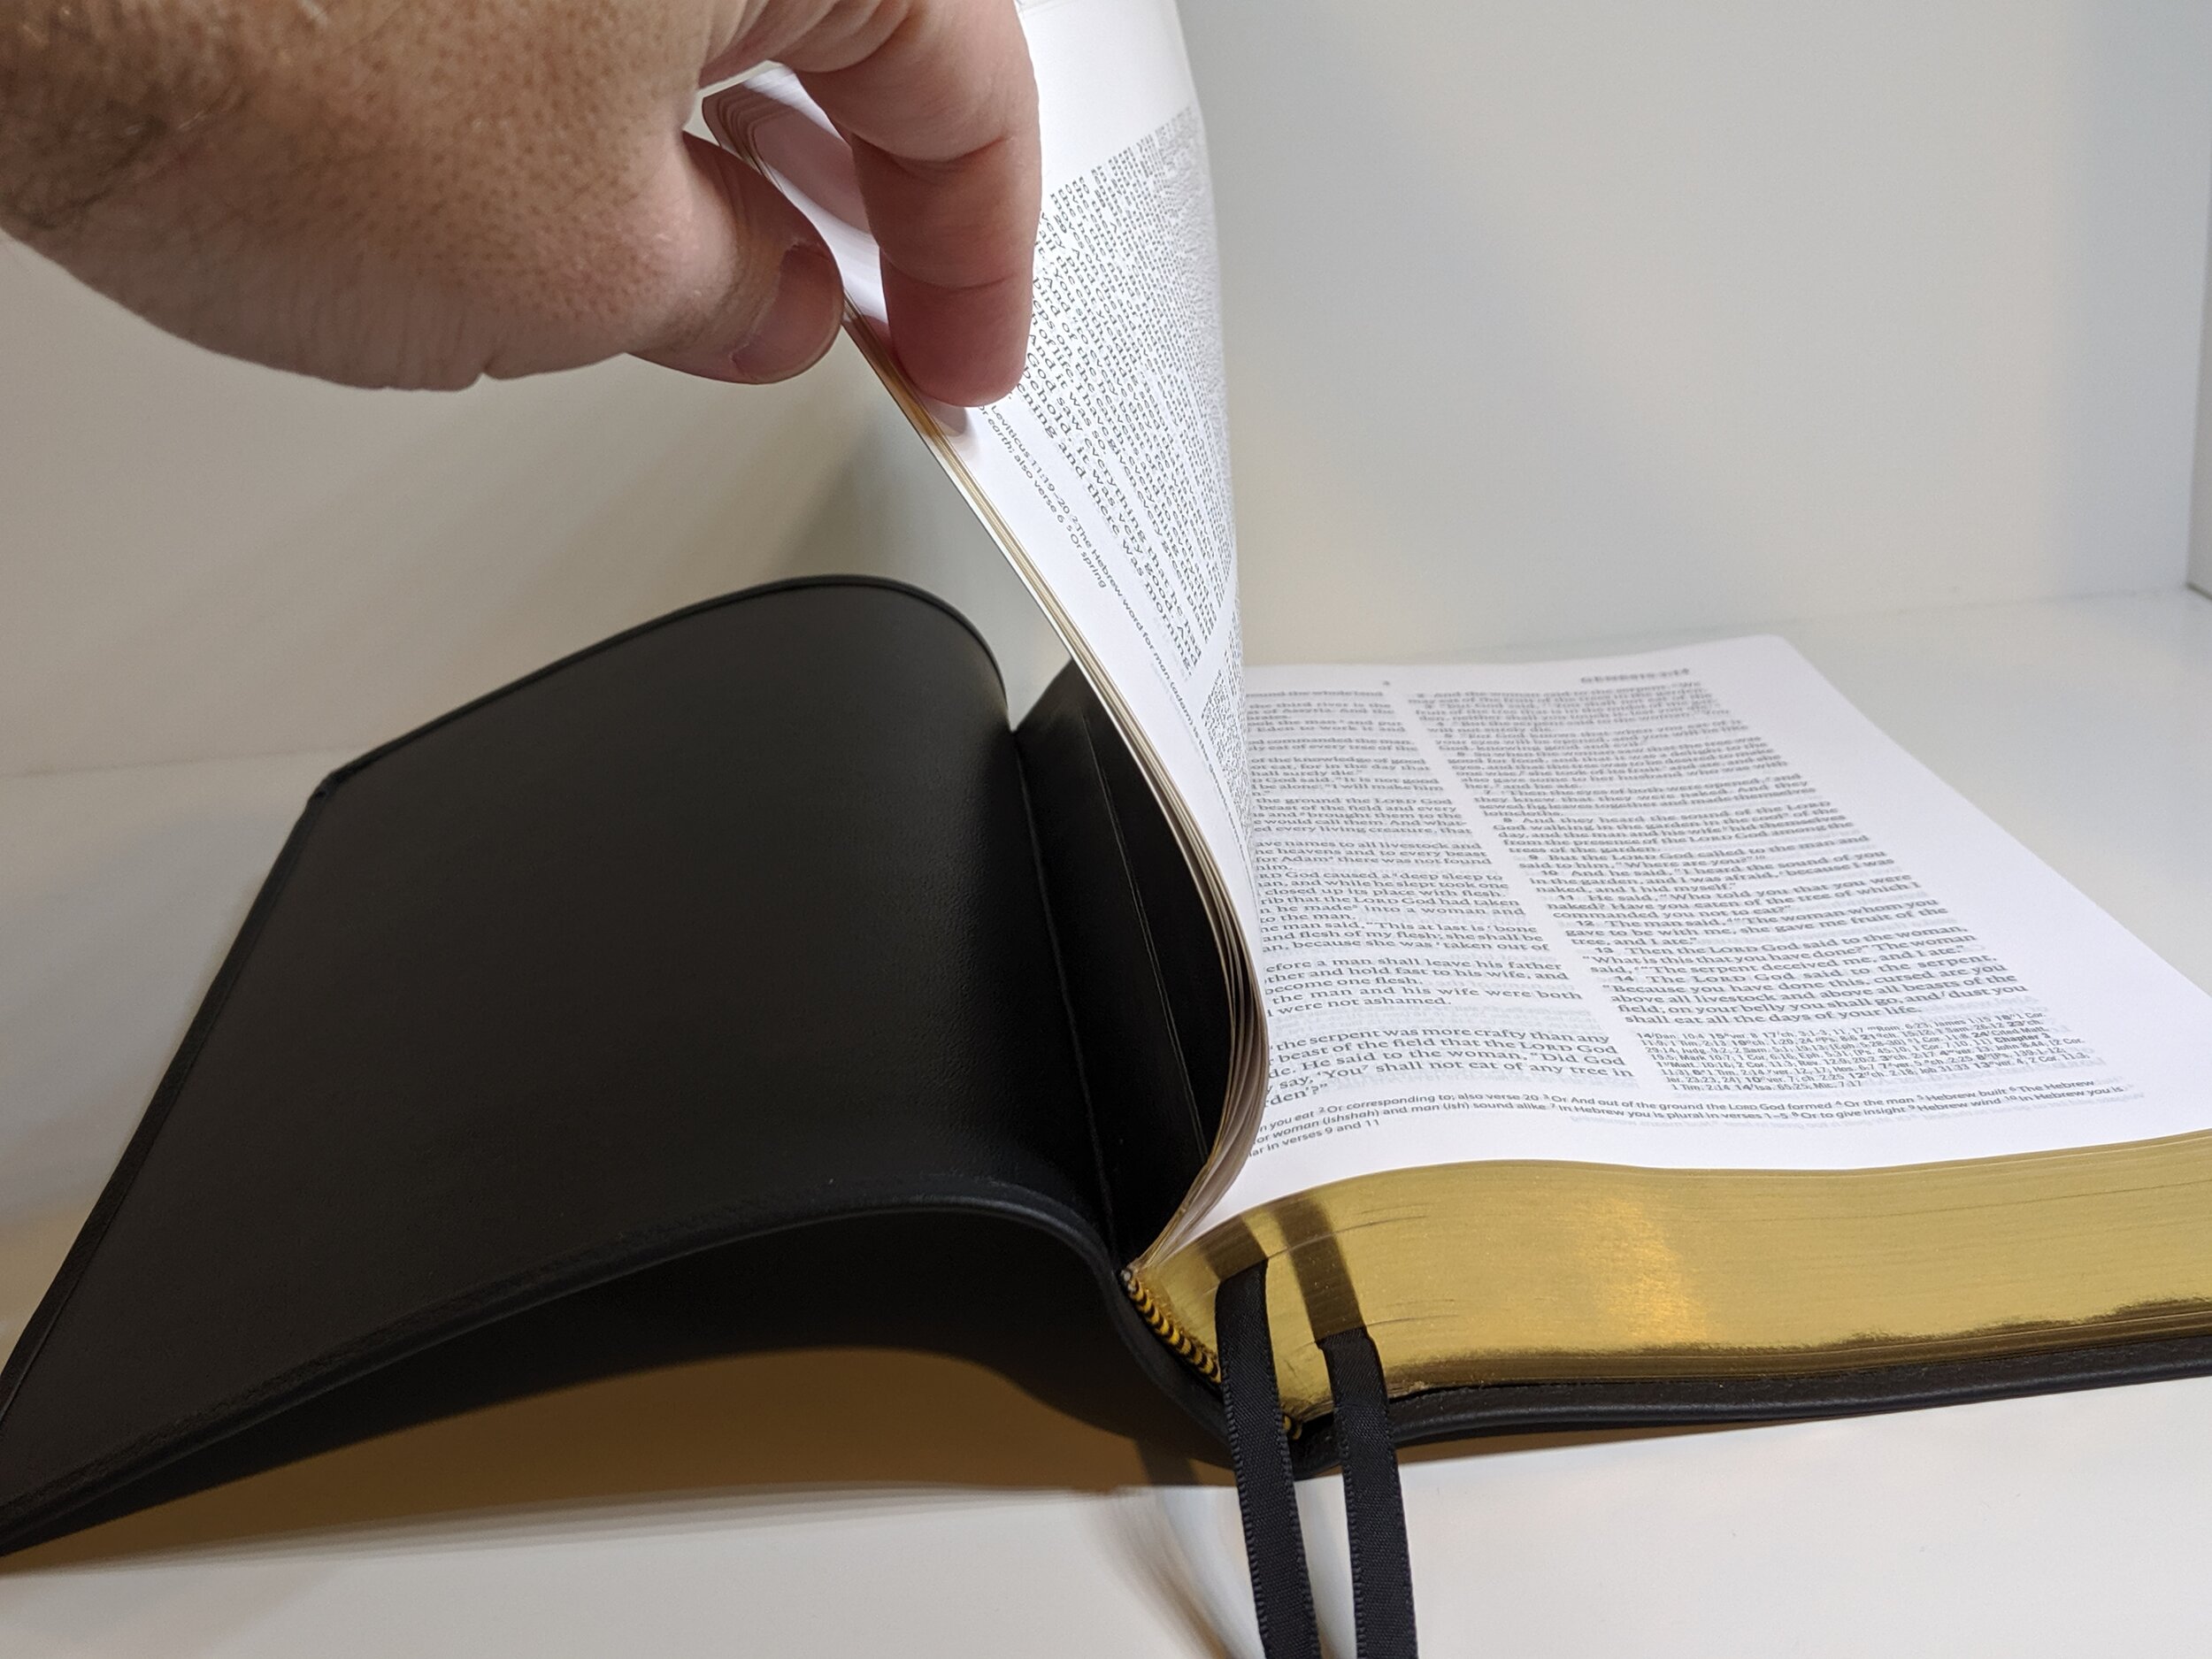  It may be worth noting that this Bible doesn’t lay flat at Genesis out of the box. 